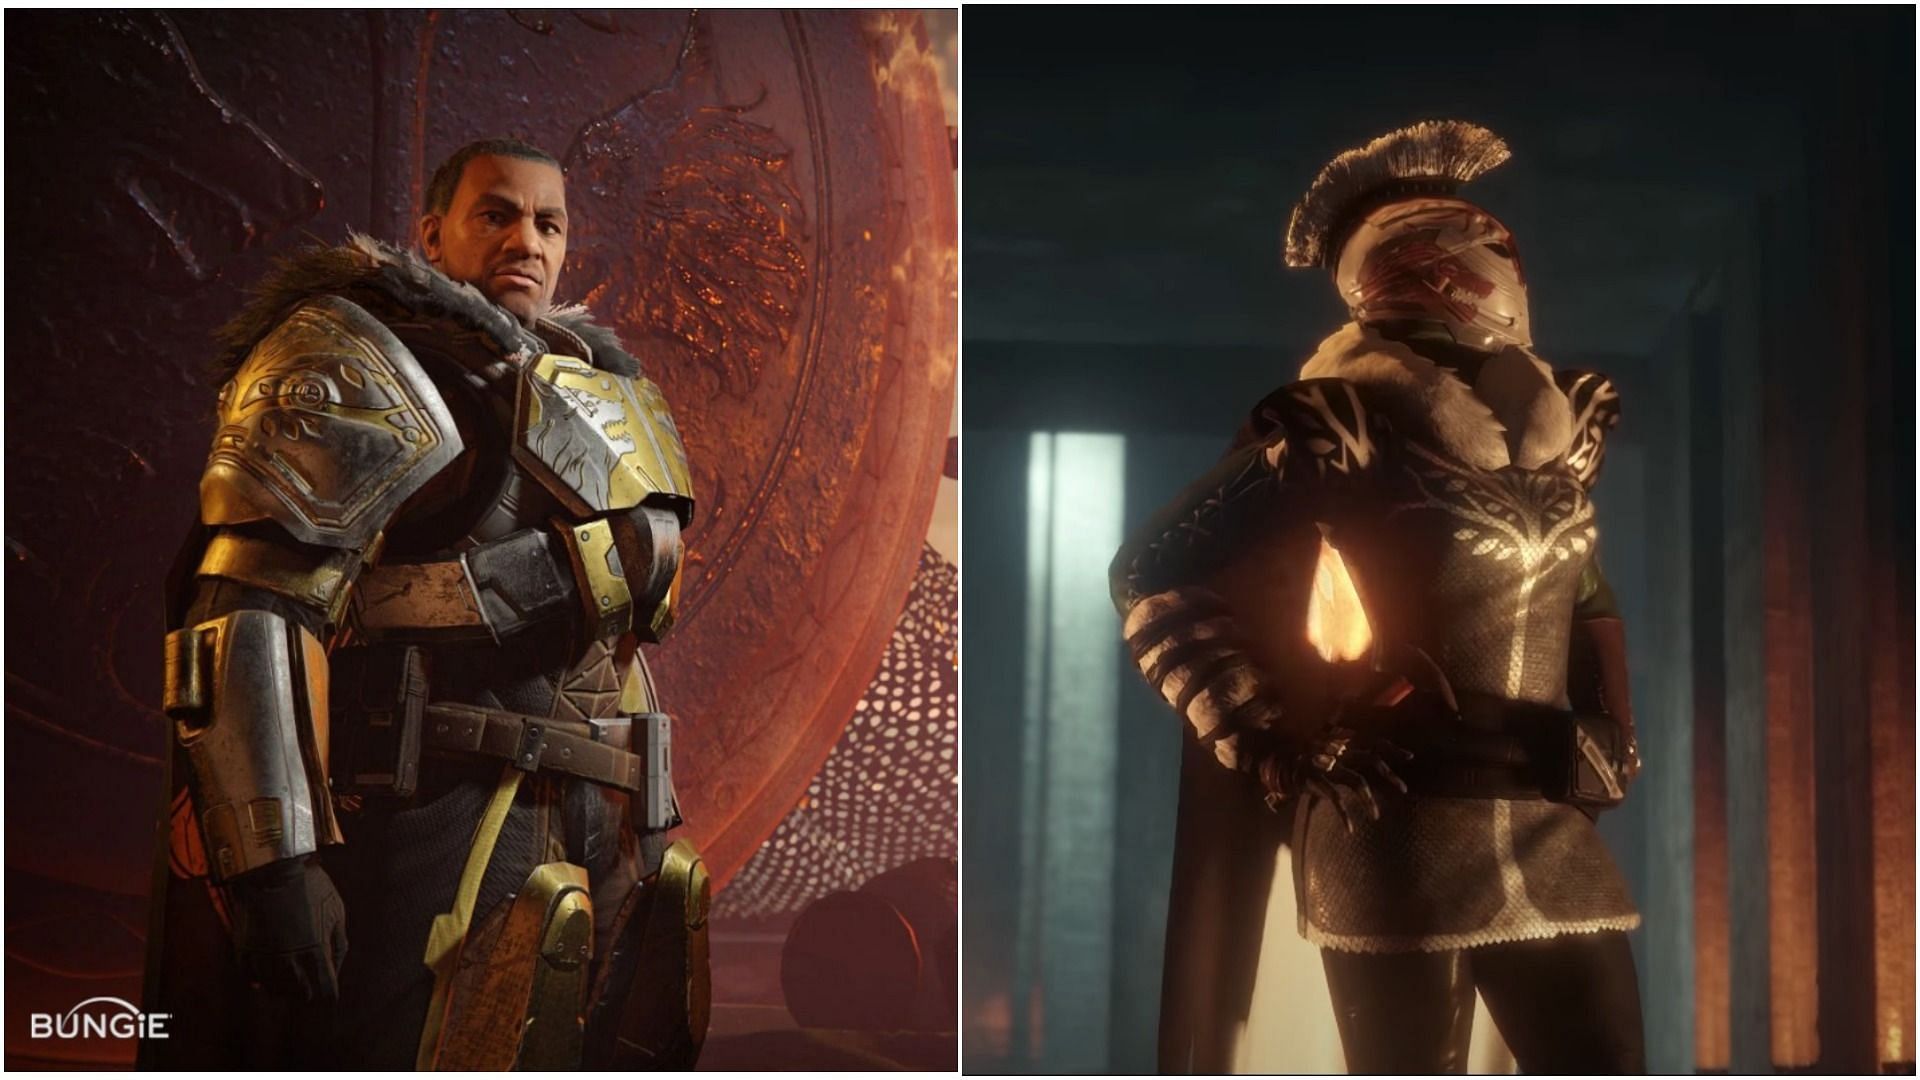 Lord Saladin and Lady Efrideet (Image via Bungie)